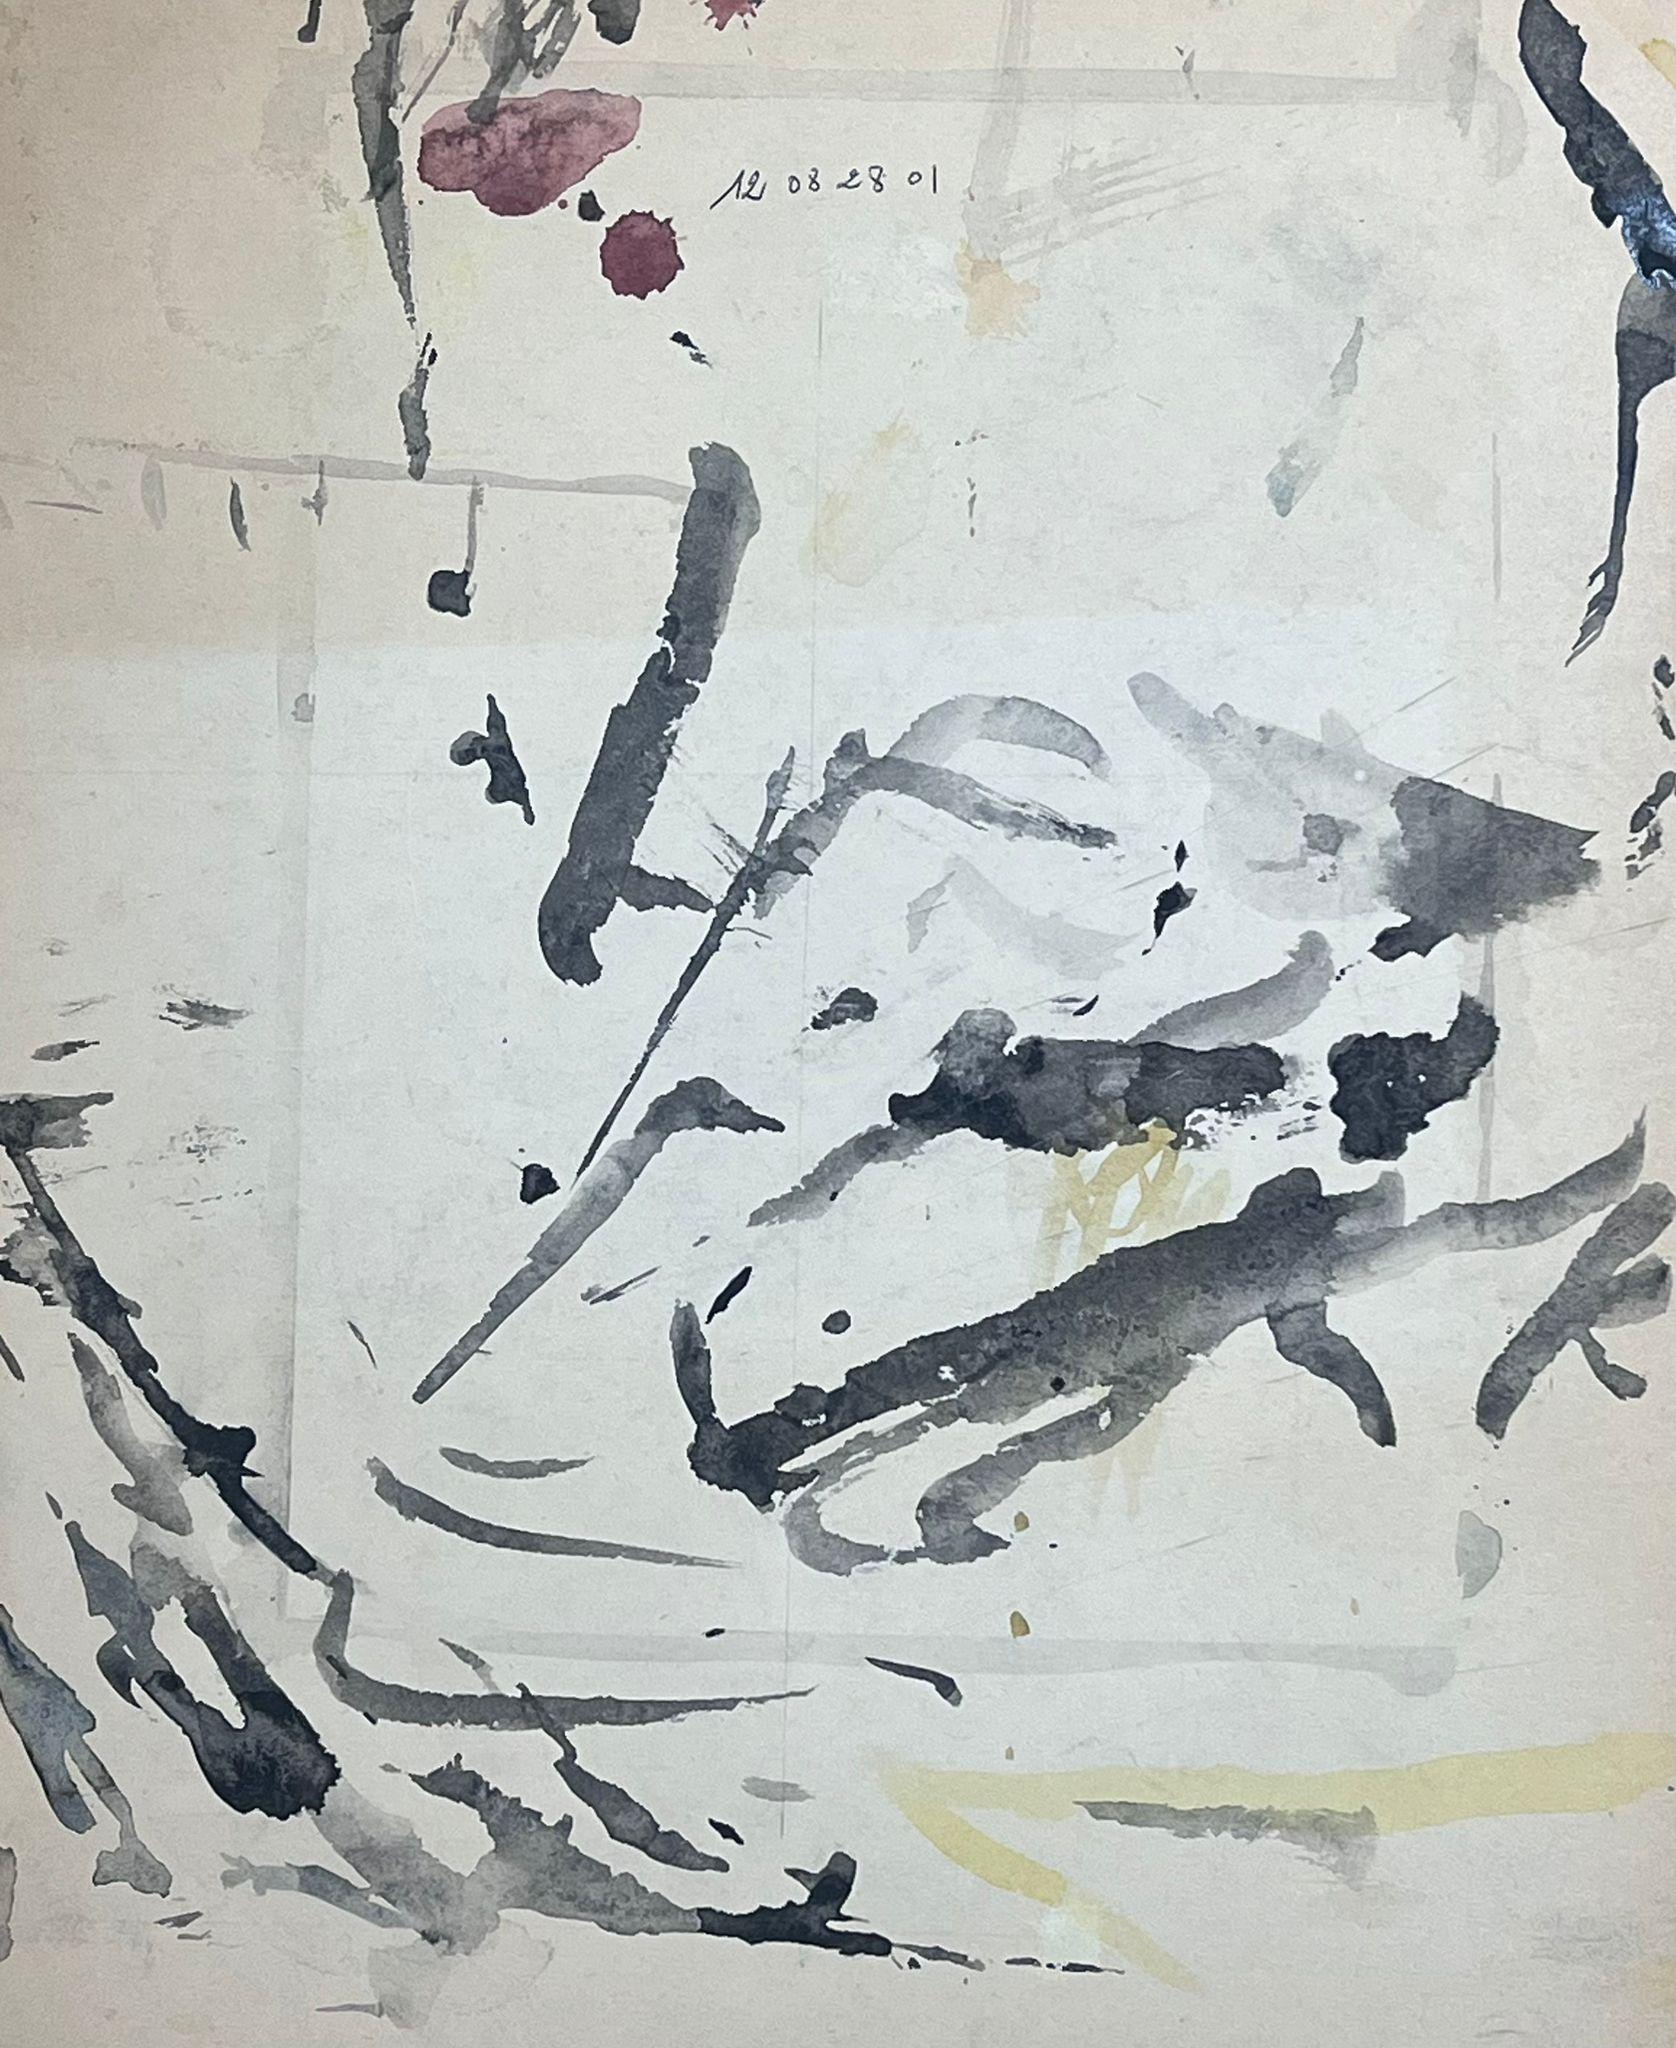 Abstract Expressionist Composition 
by Jacques COULAIS (1955-2011) watercolour painting on board
unframed: 16.75 x 14 inches
condition: excellent
provenance: all the paintings we have for sale by this artist have come from the artists studio and are